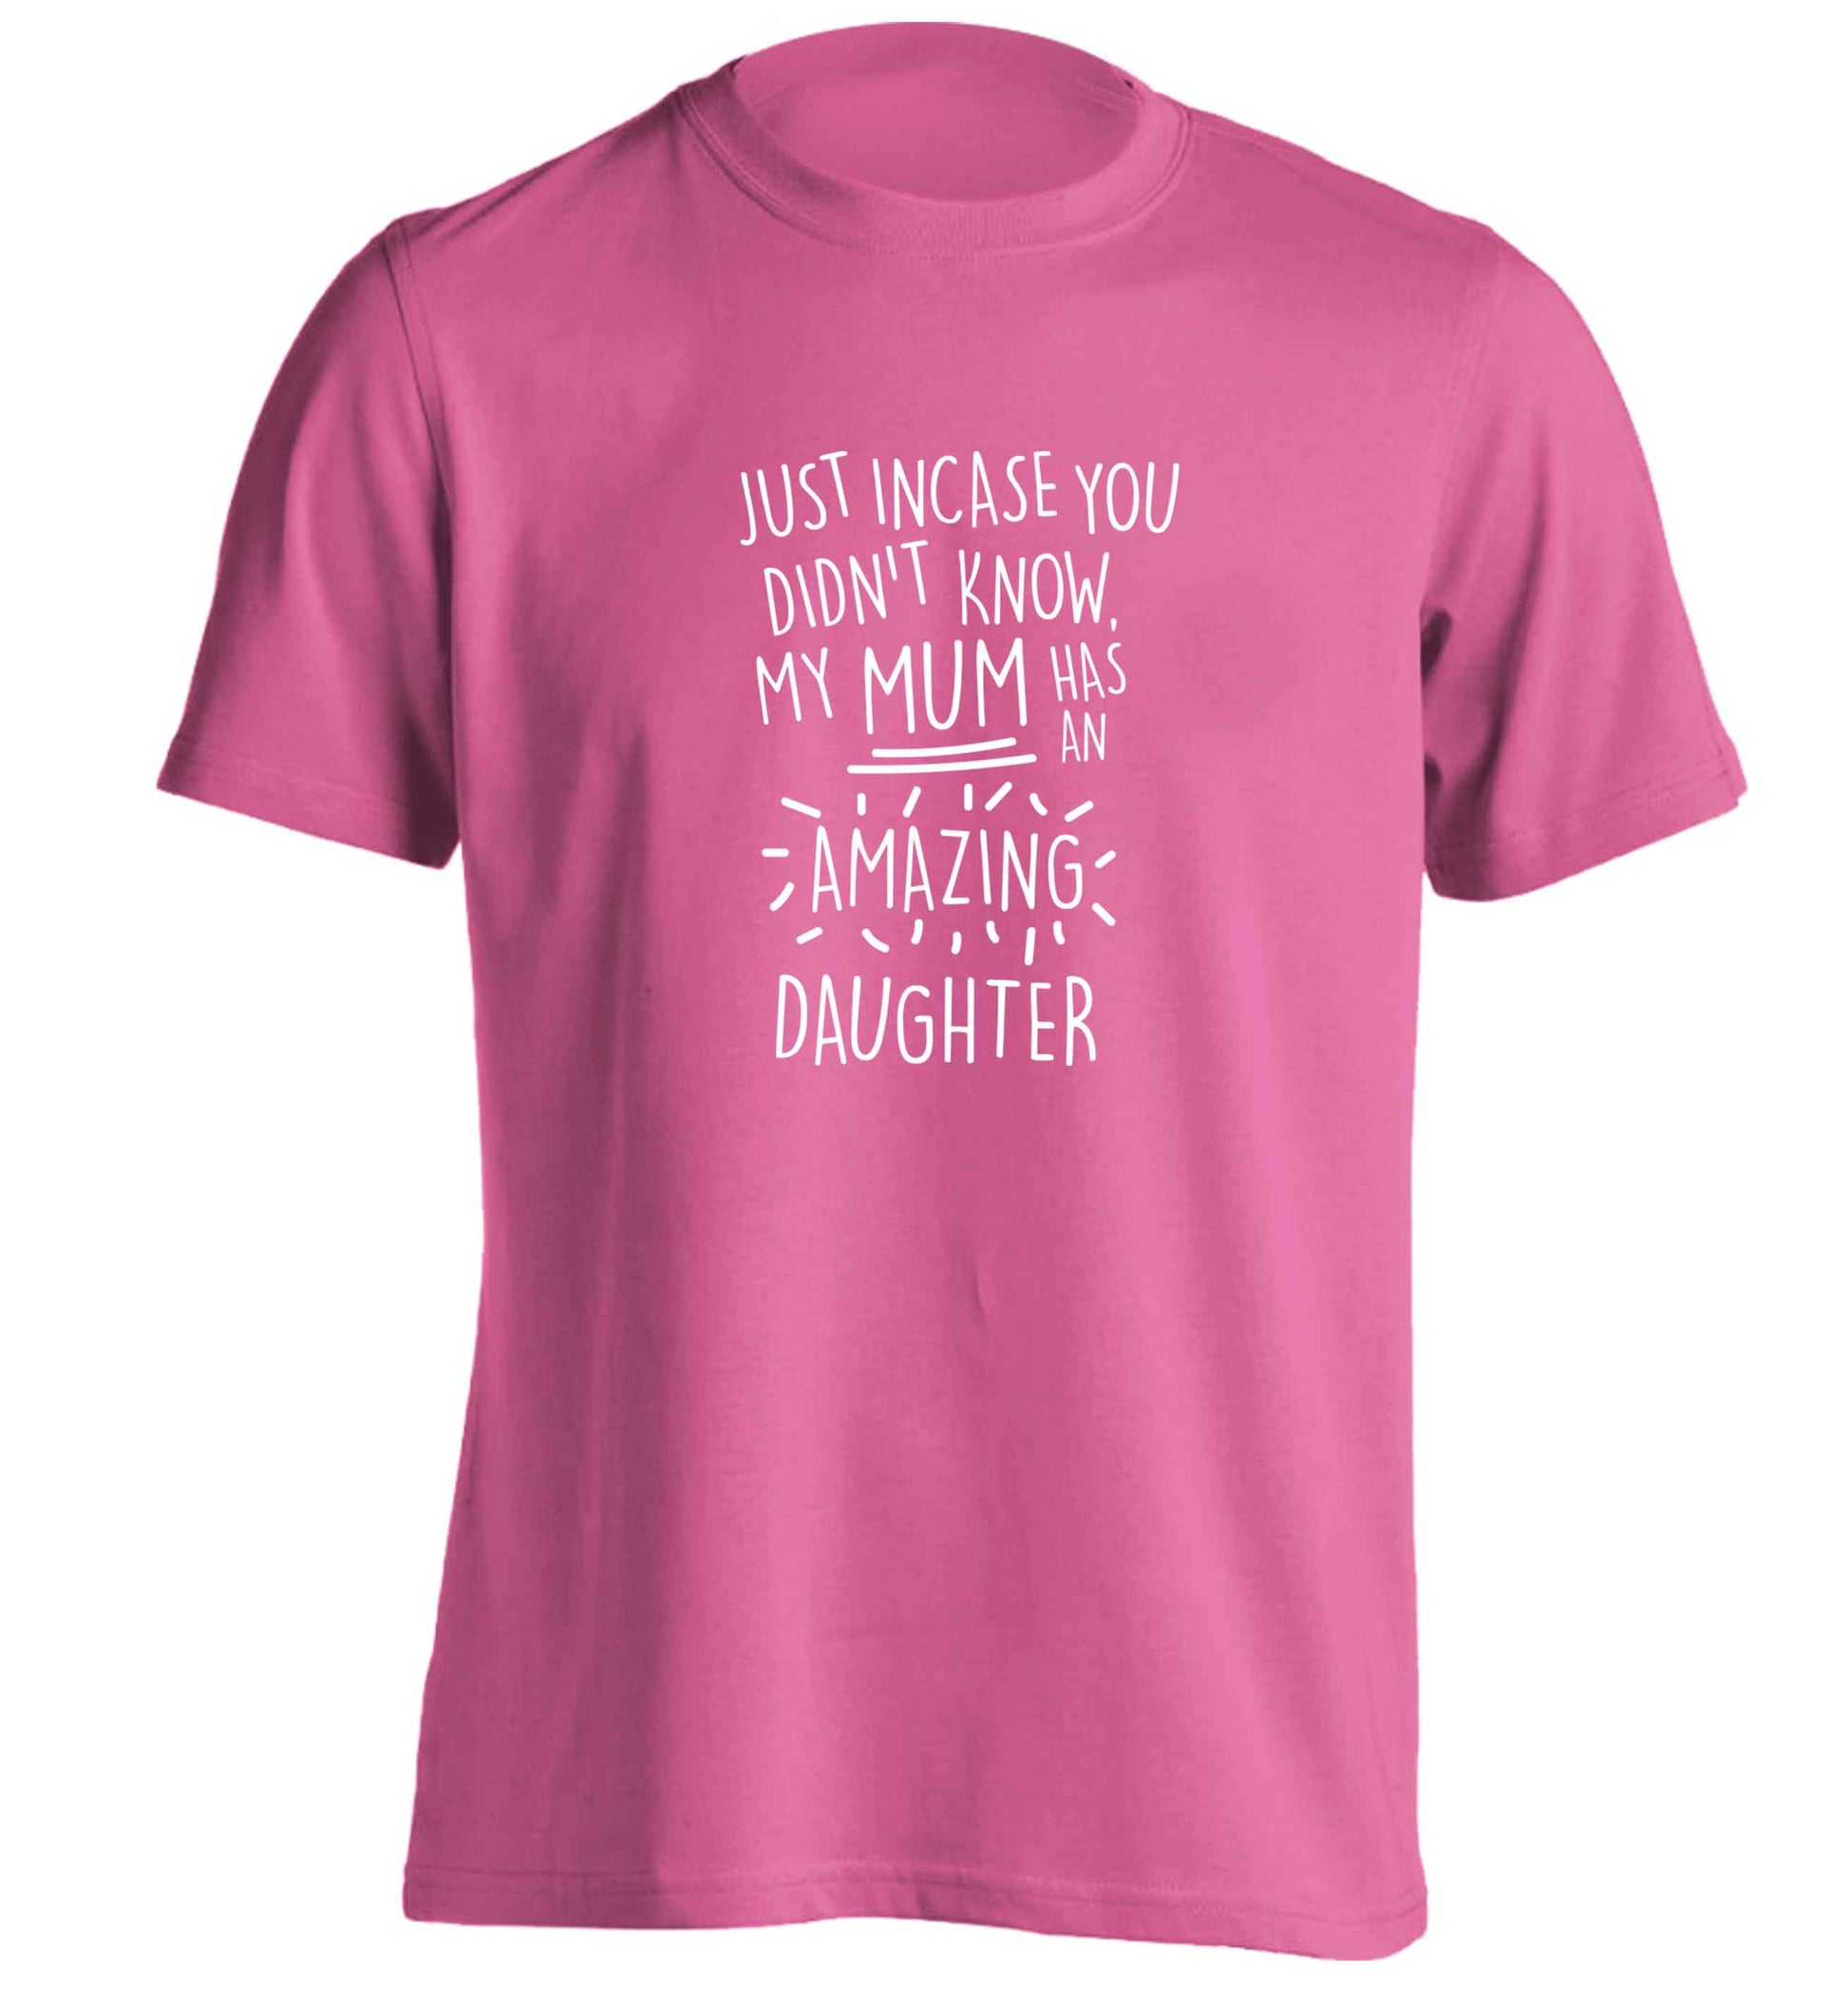 Just incase you didn't know my mum has an amazing daughter adults unisex pink Tshirt 2XL